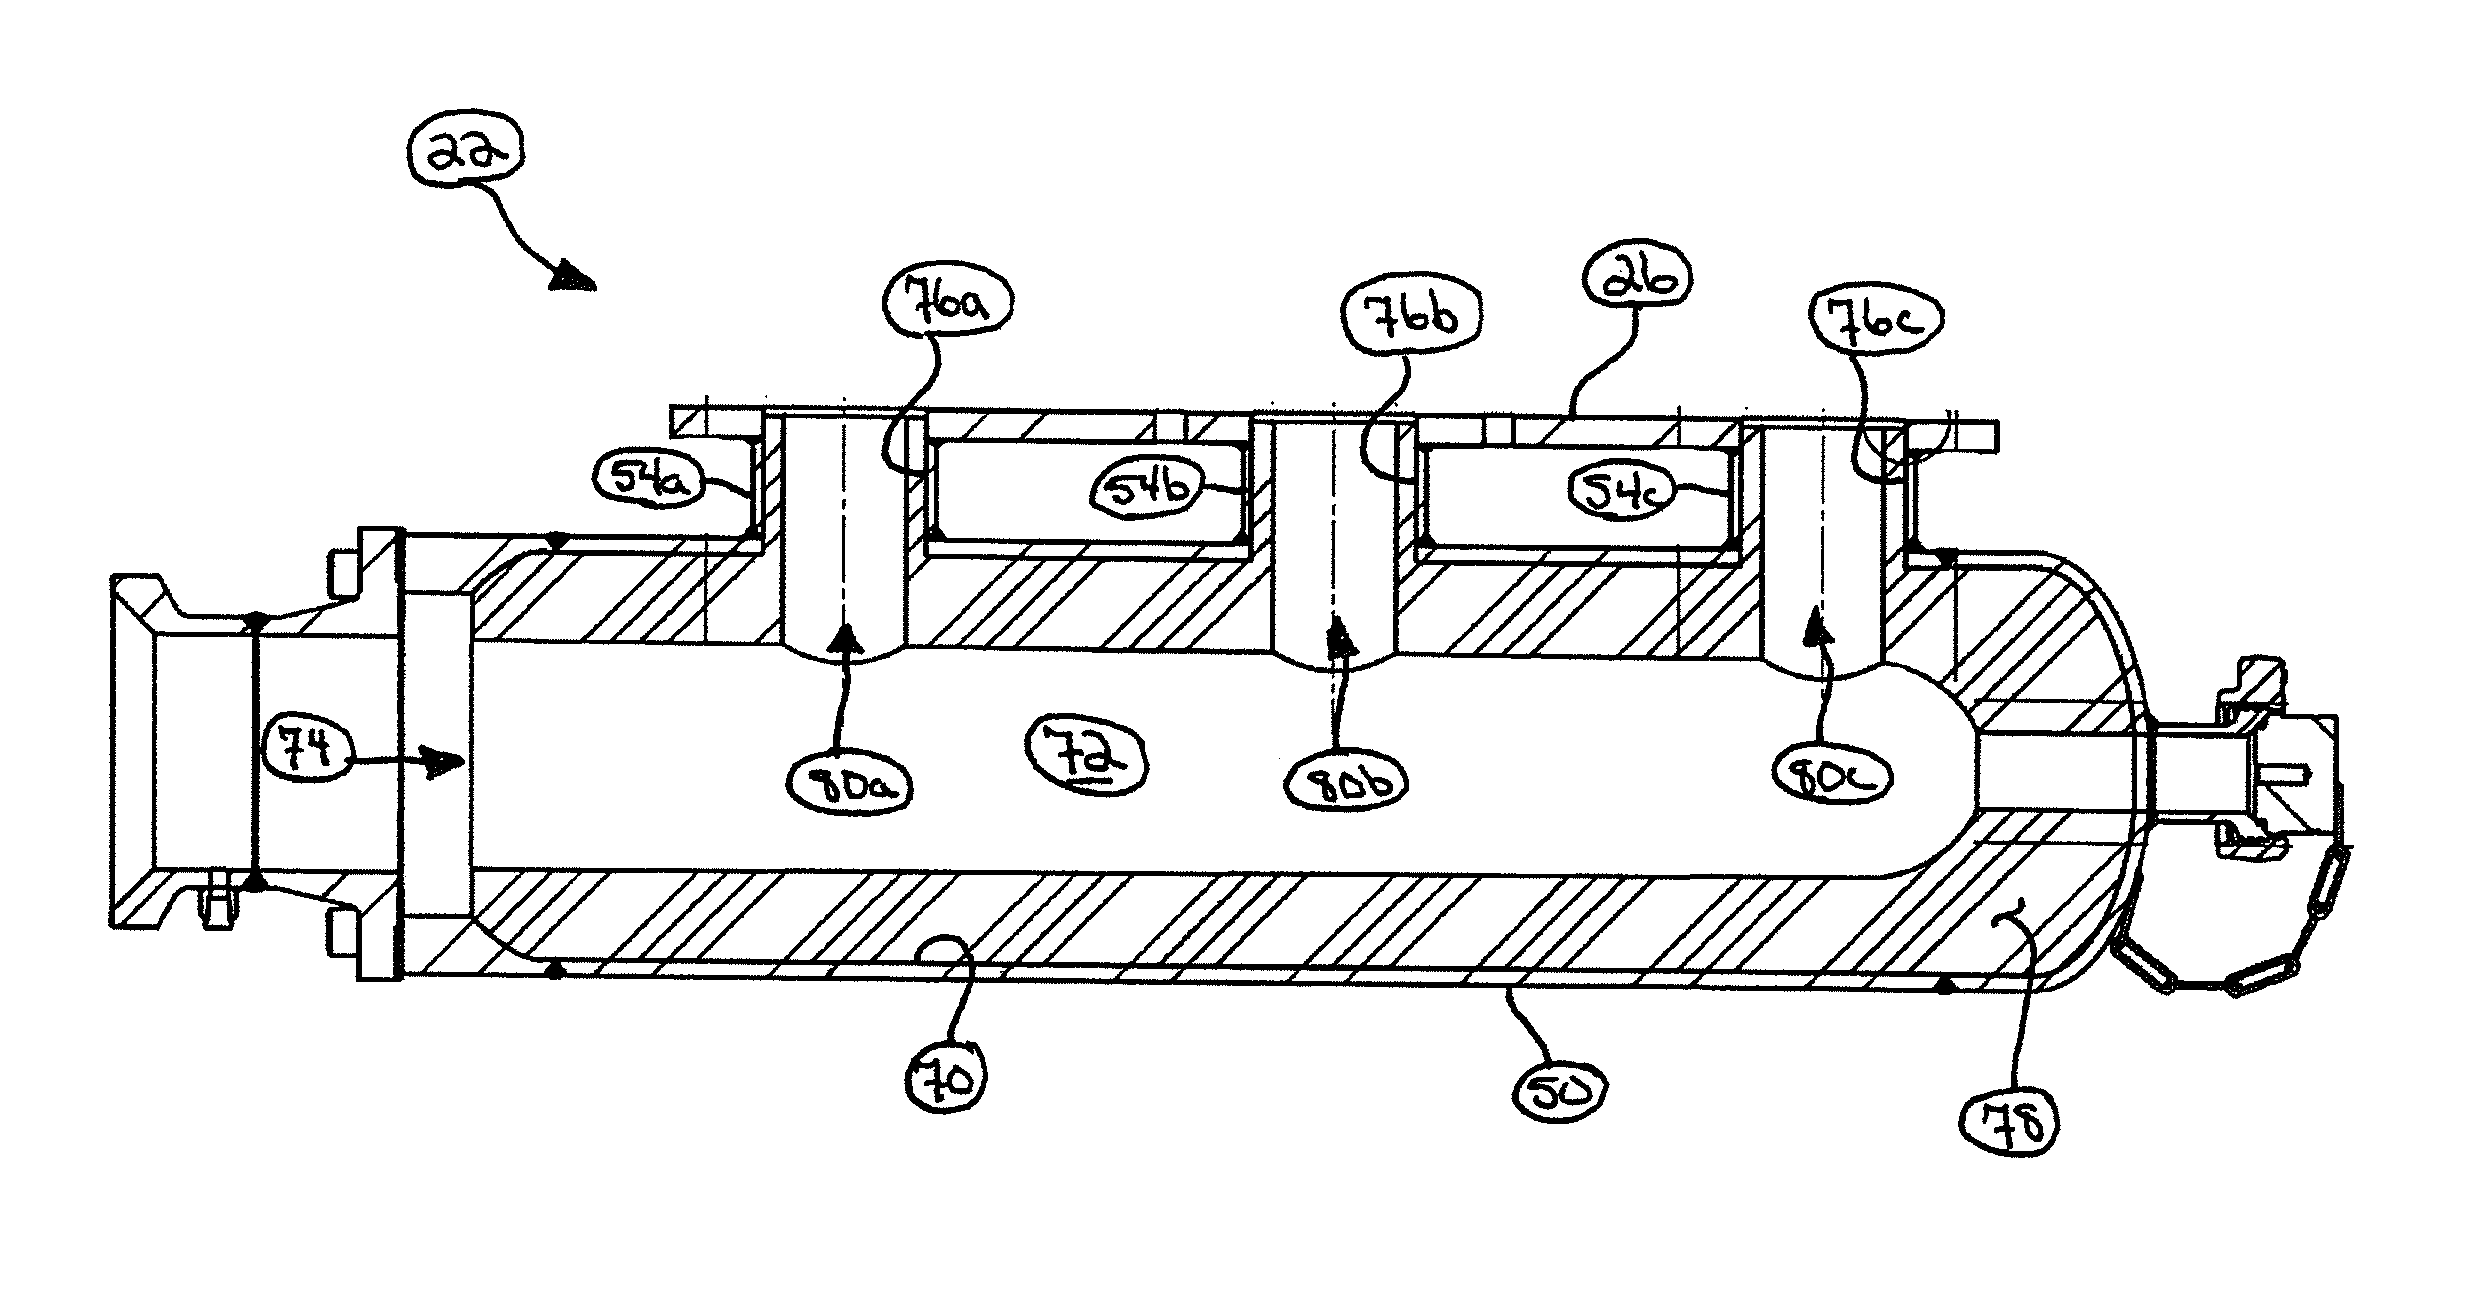 Fluid liner wear indicator for suction manifold of reciprocating pump assembly